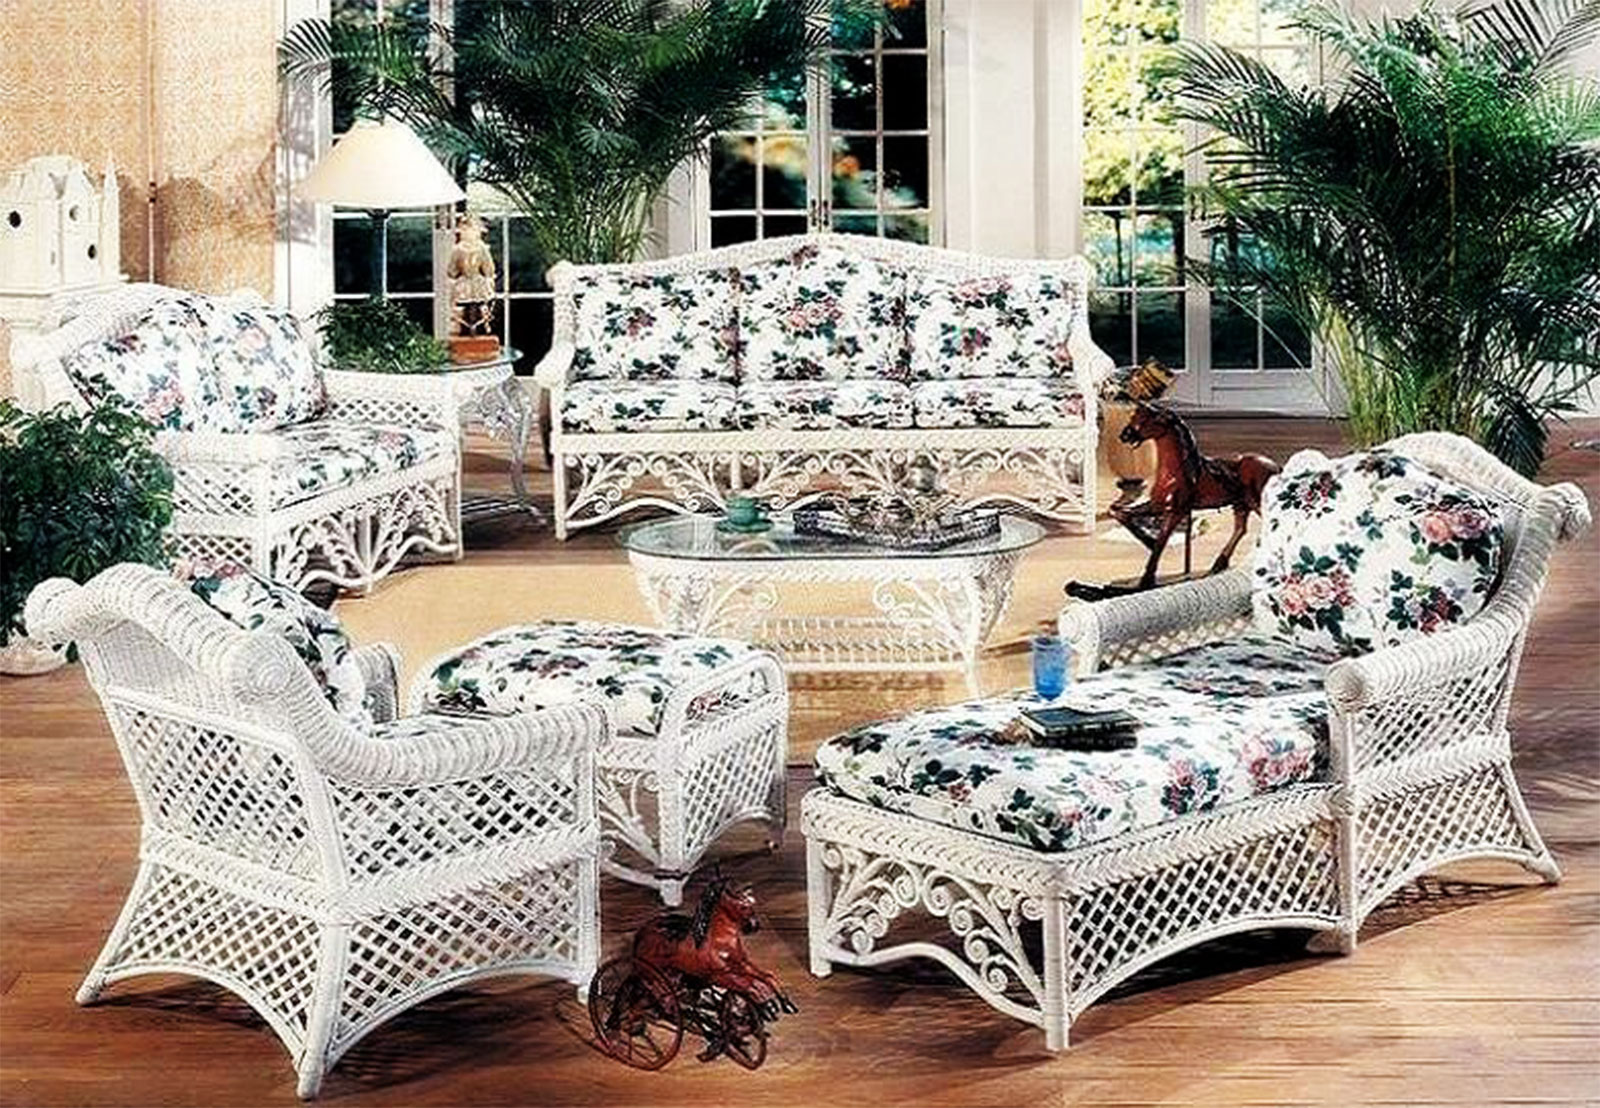 Used Indoor Wicker Furniture For Sale ~ 100 Wicker Furniture Ideas ...